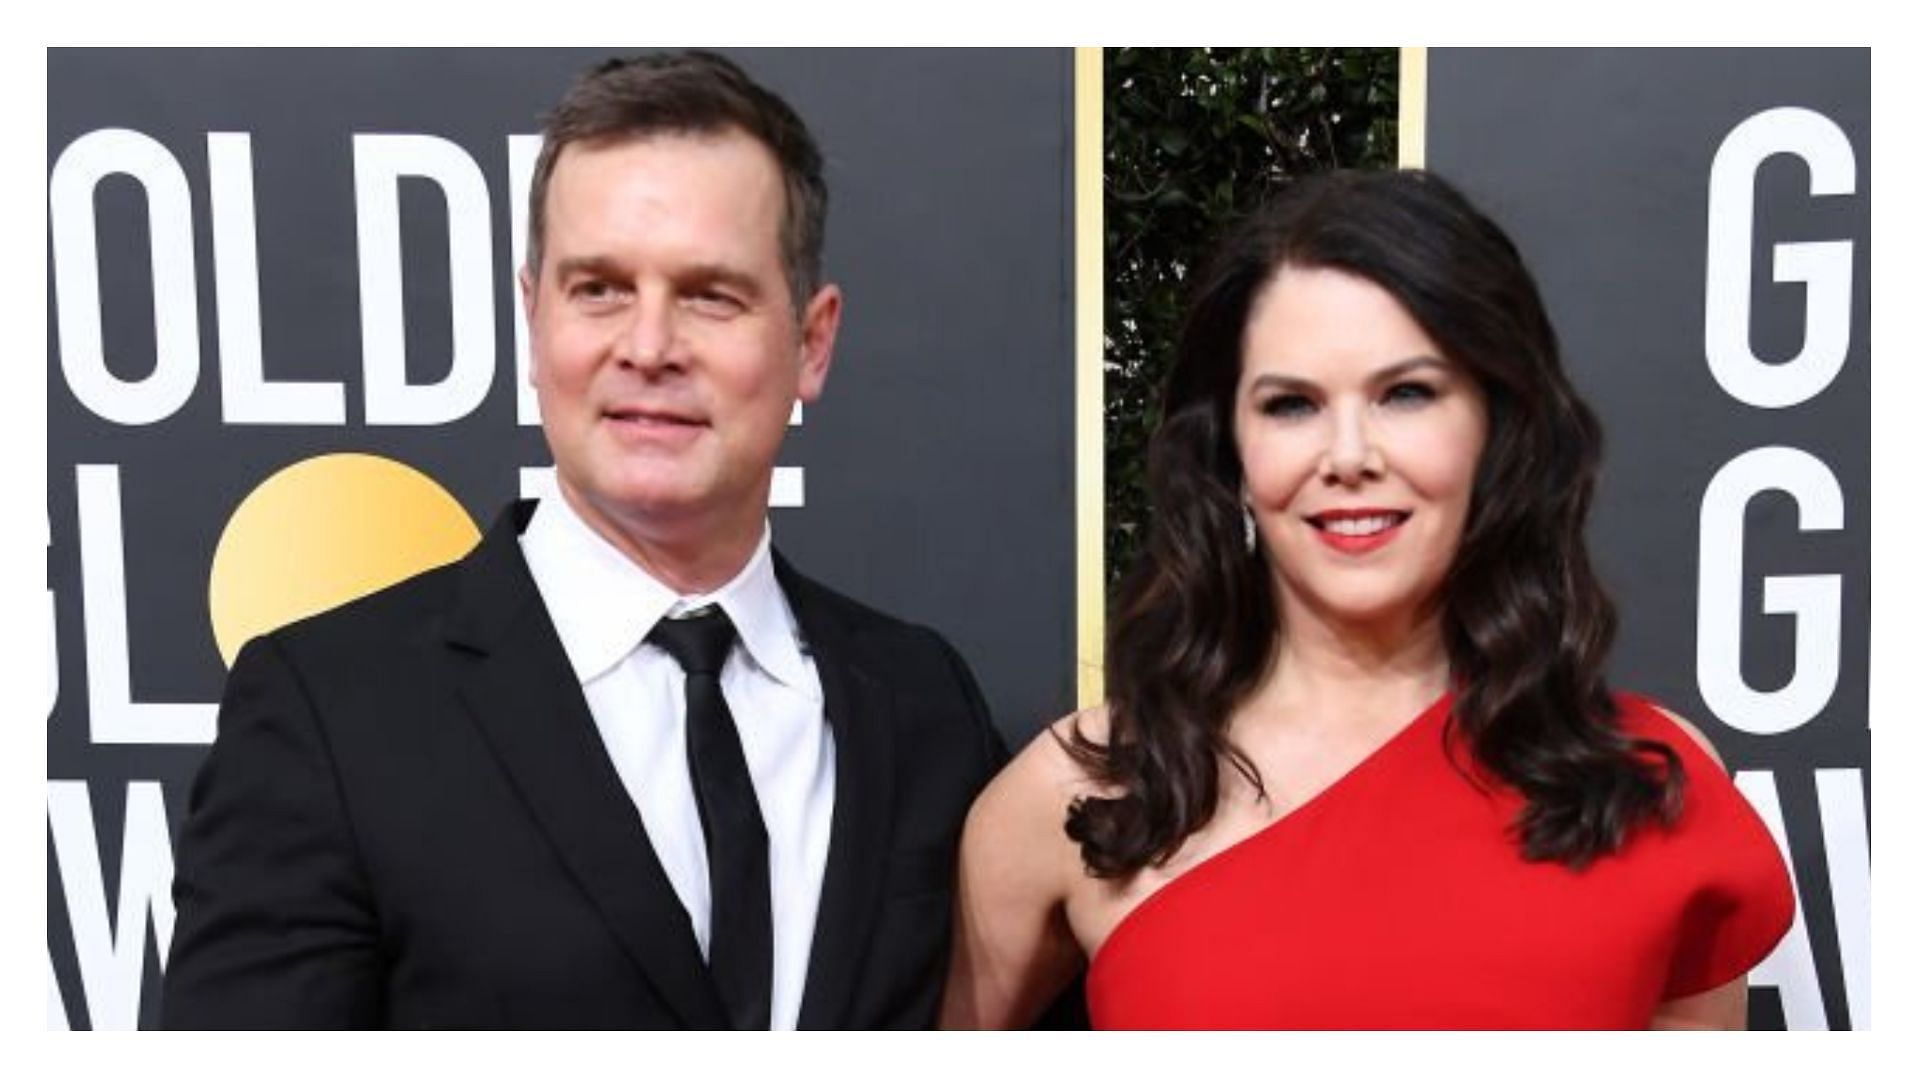 Lauren Graham and Peter Krause have announced their separation (Image via Steve Granitz/Getty Images)